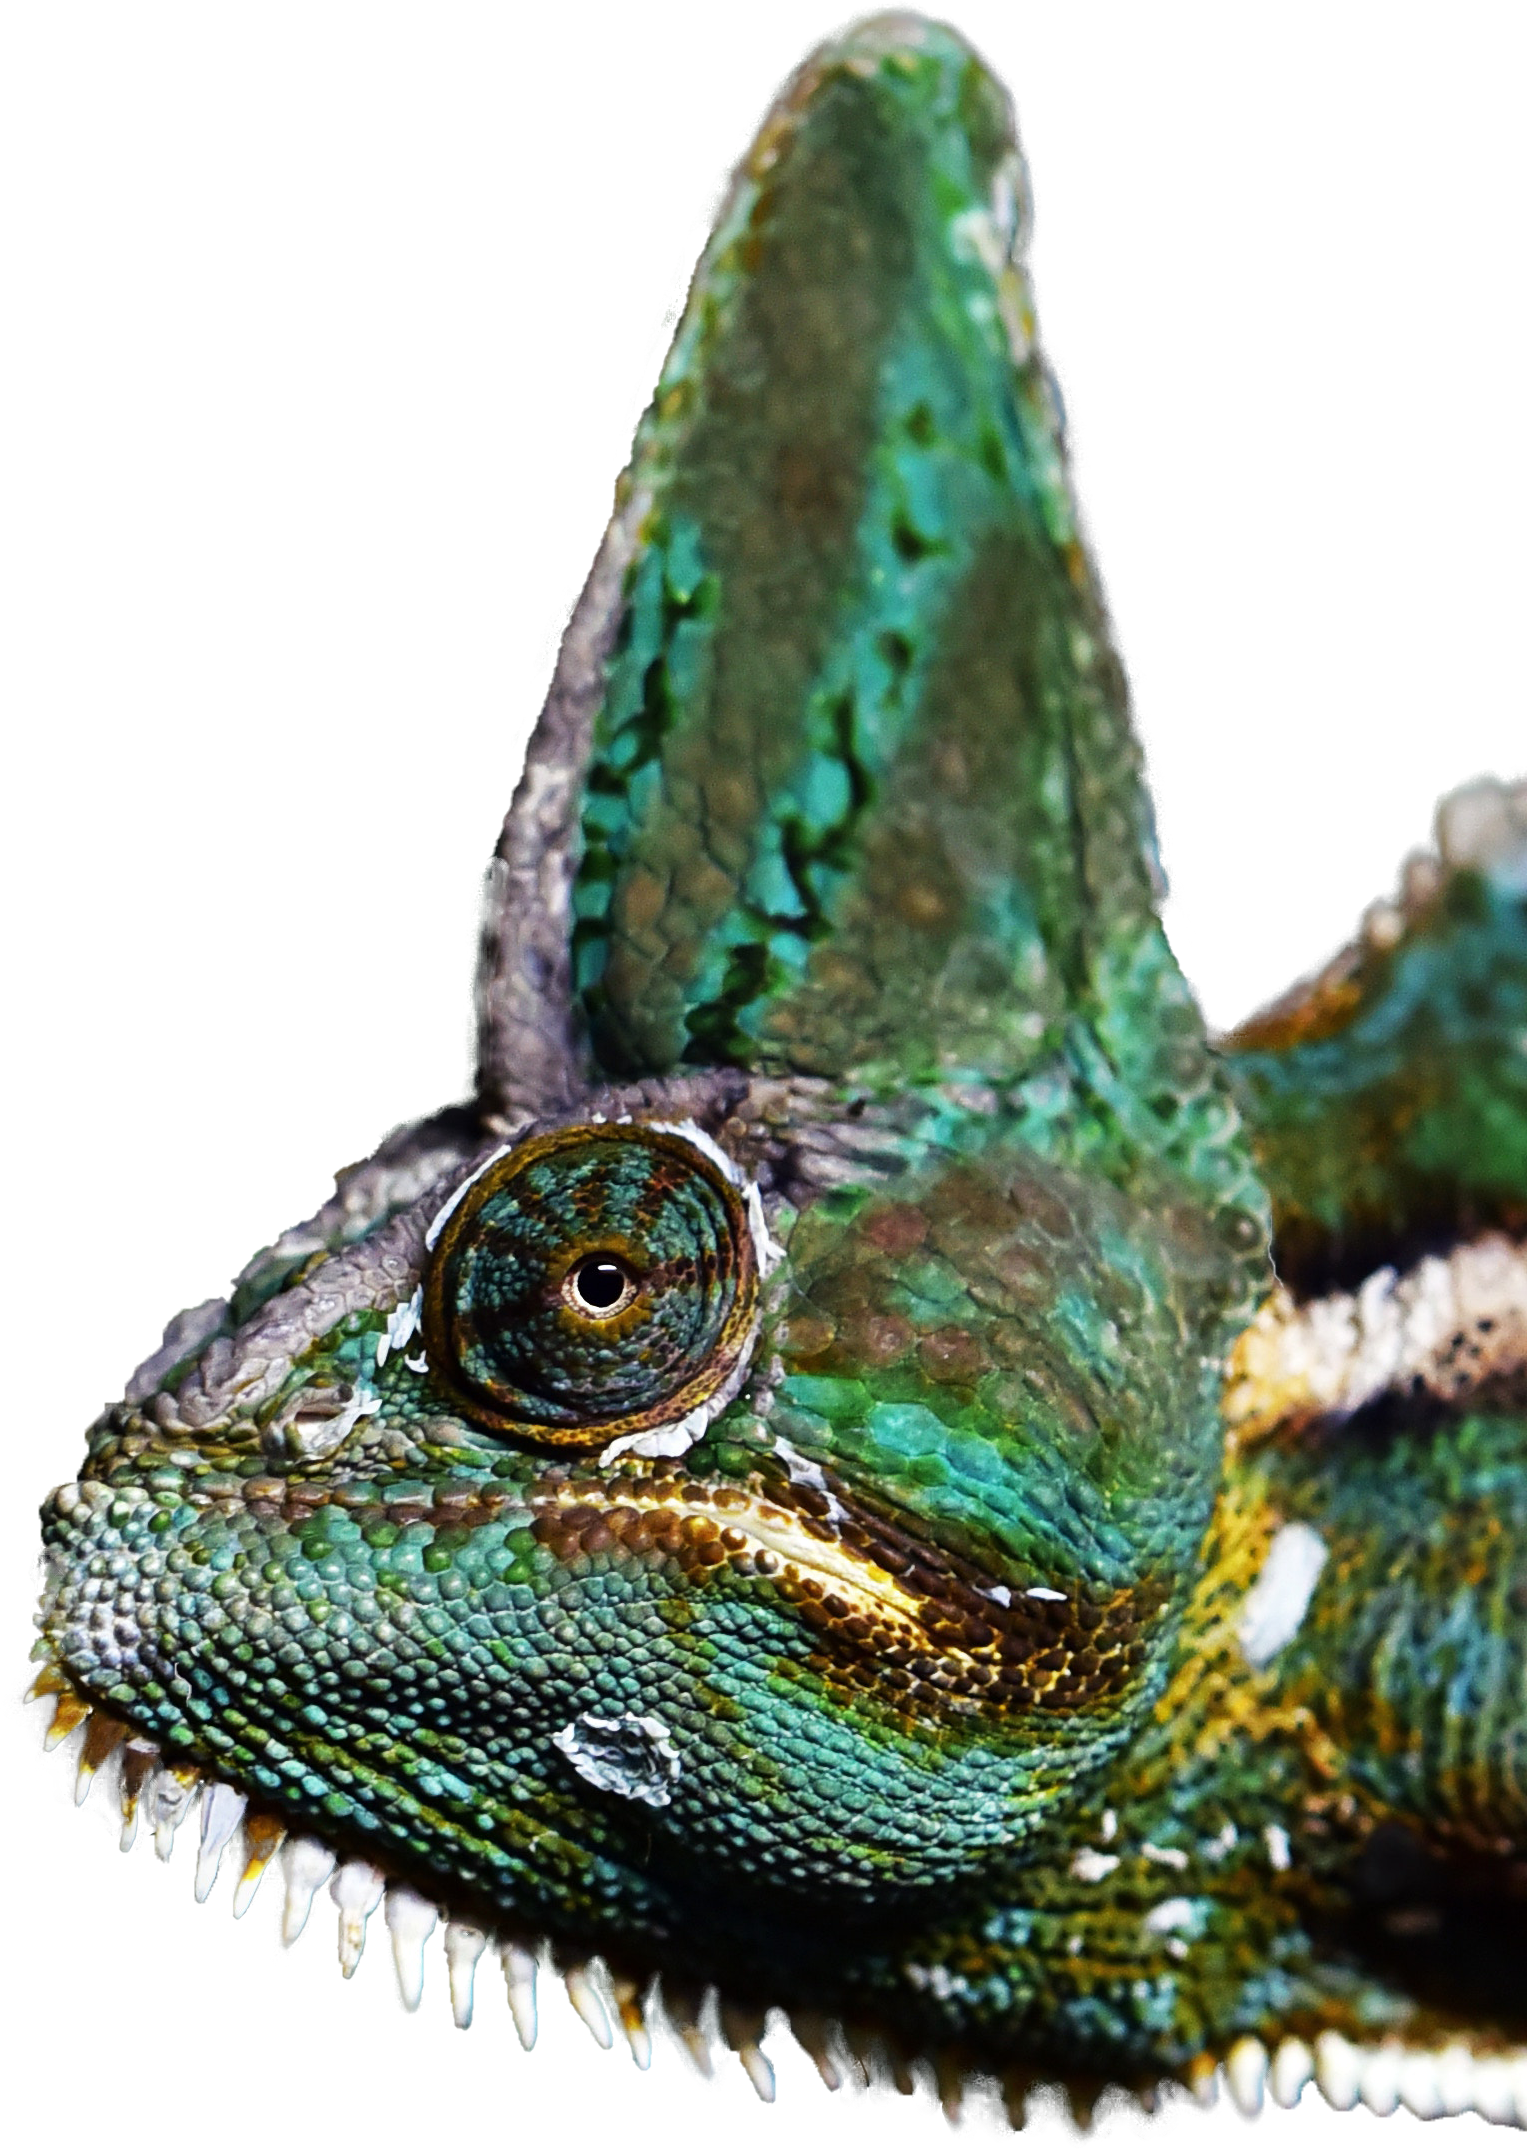 A Close Up Of A Chameleon